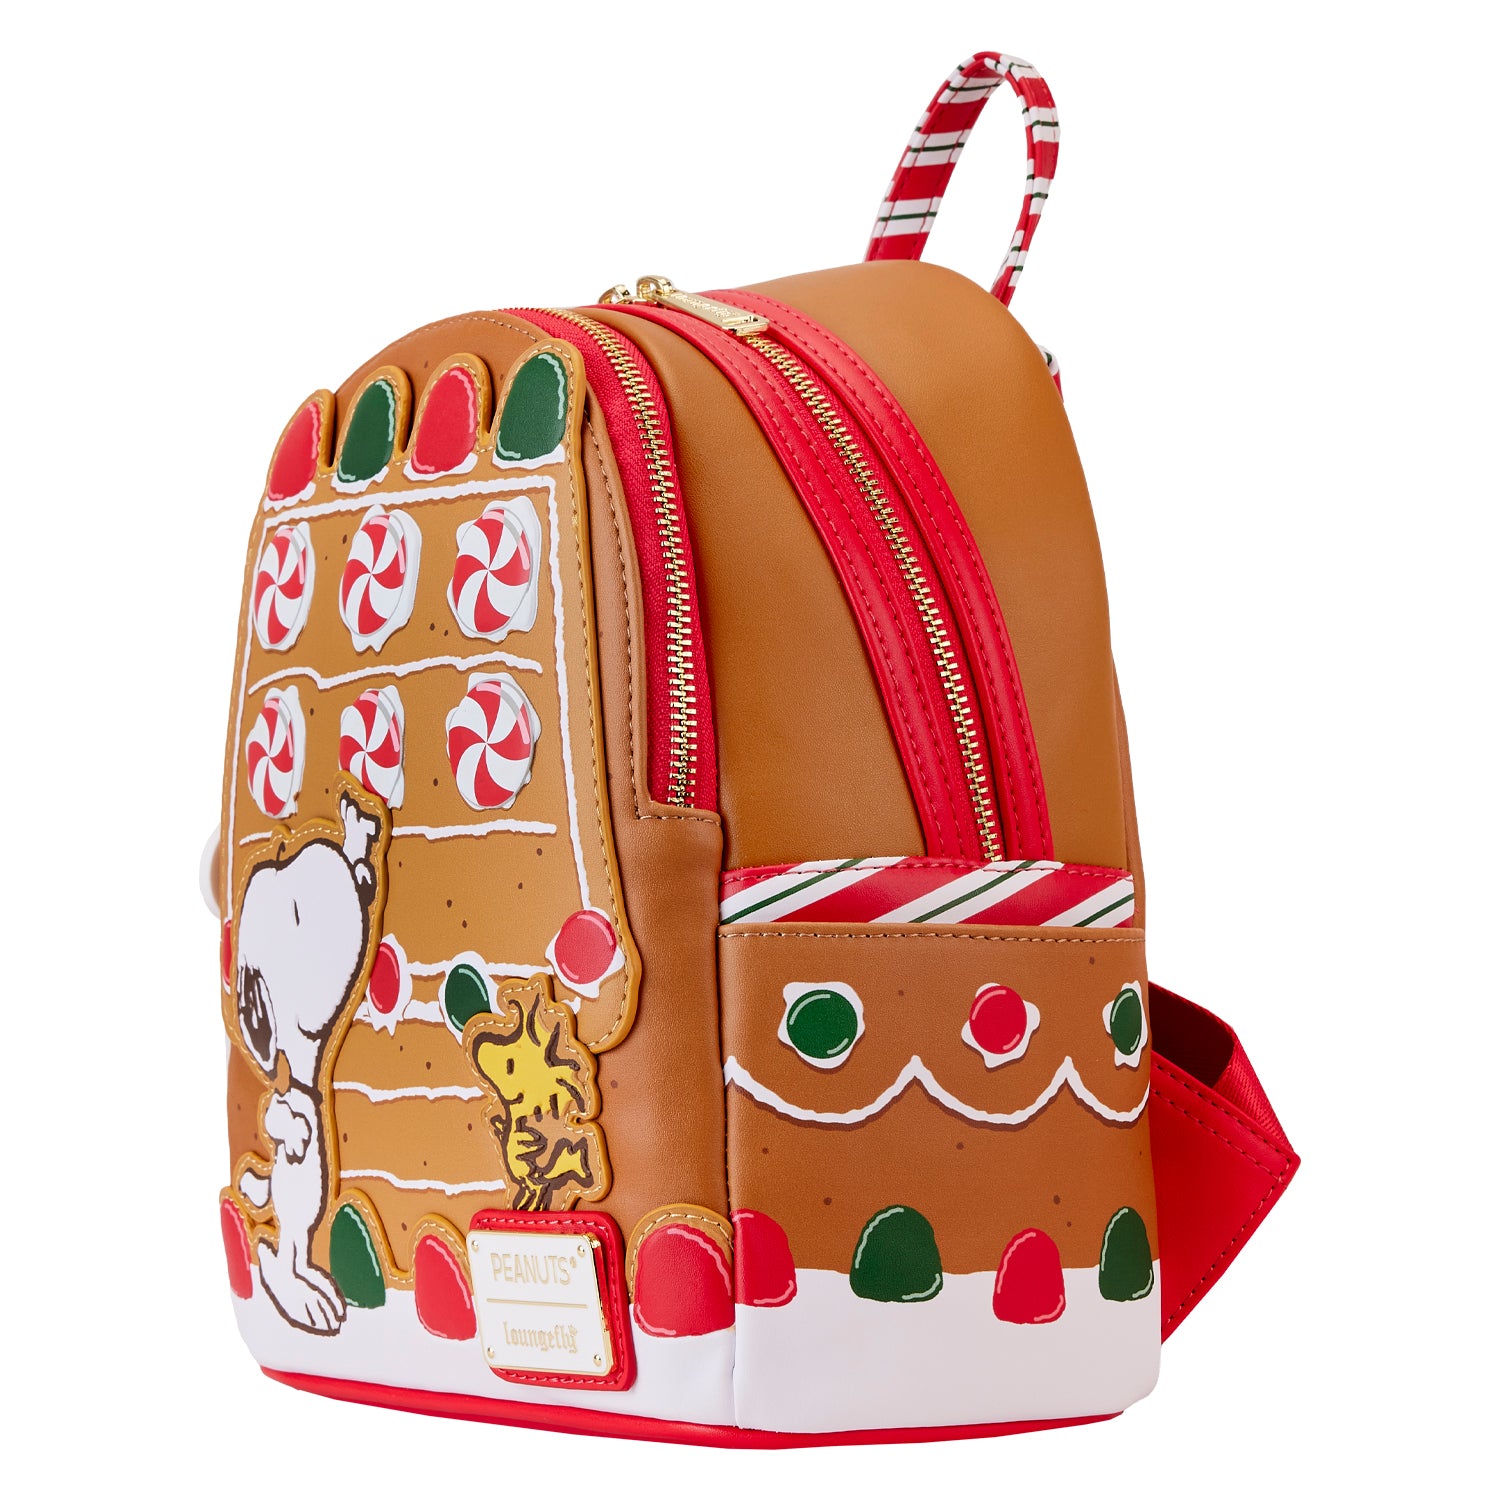 Loungefly Peanuts Snoopy Gingerbread Mini Backpack